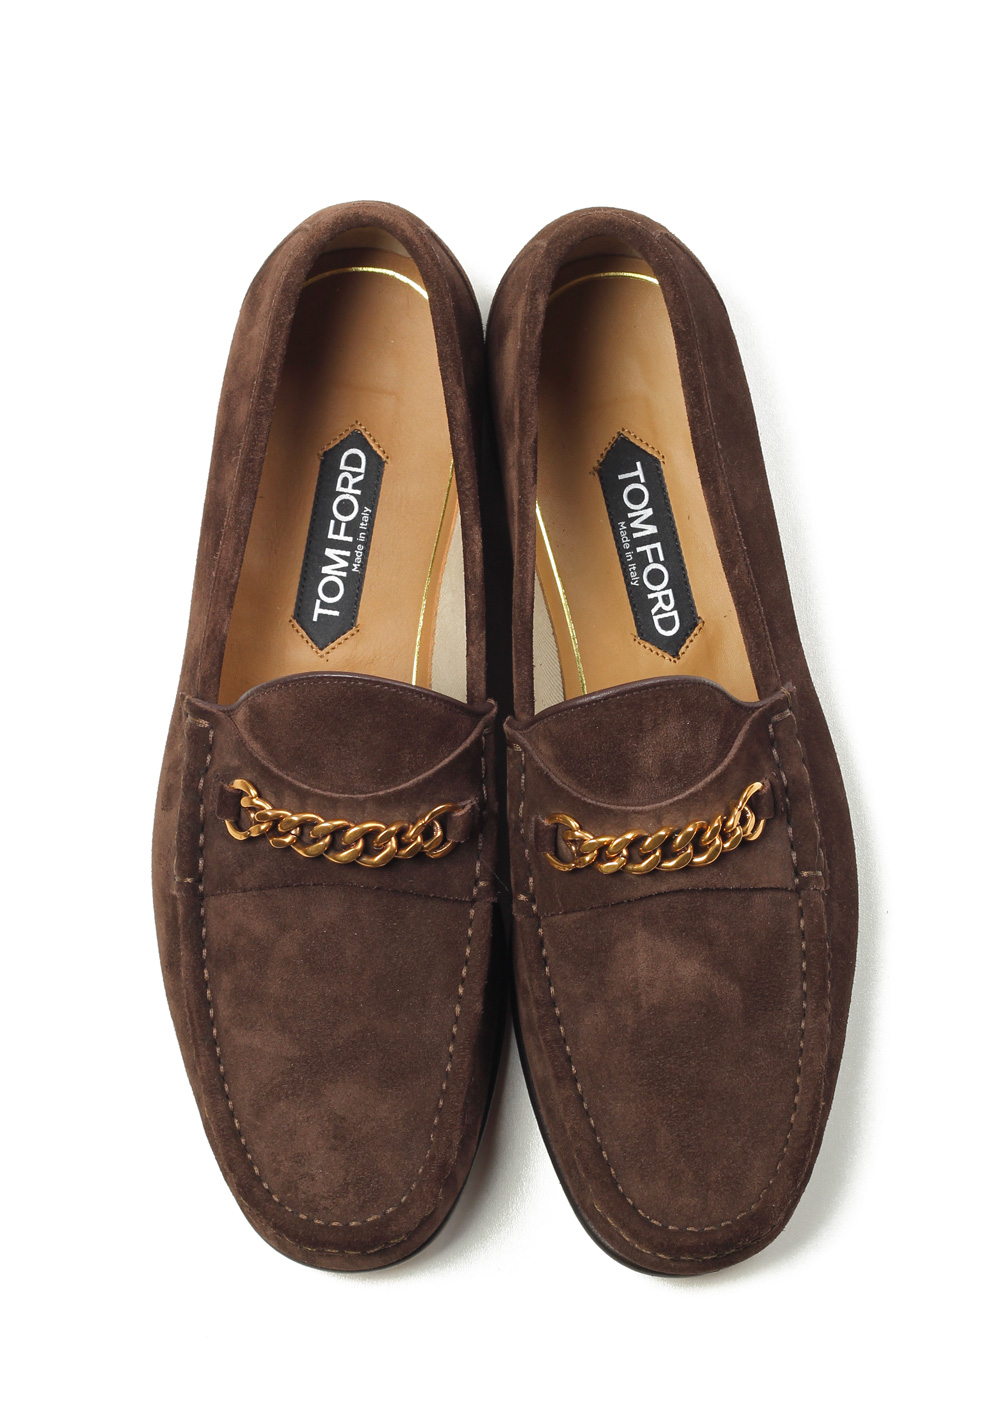 TOM FORD York Brown Suede Chain Loafers Shoes Size 9,5 UK / 10,5 U.S ...